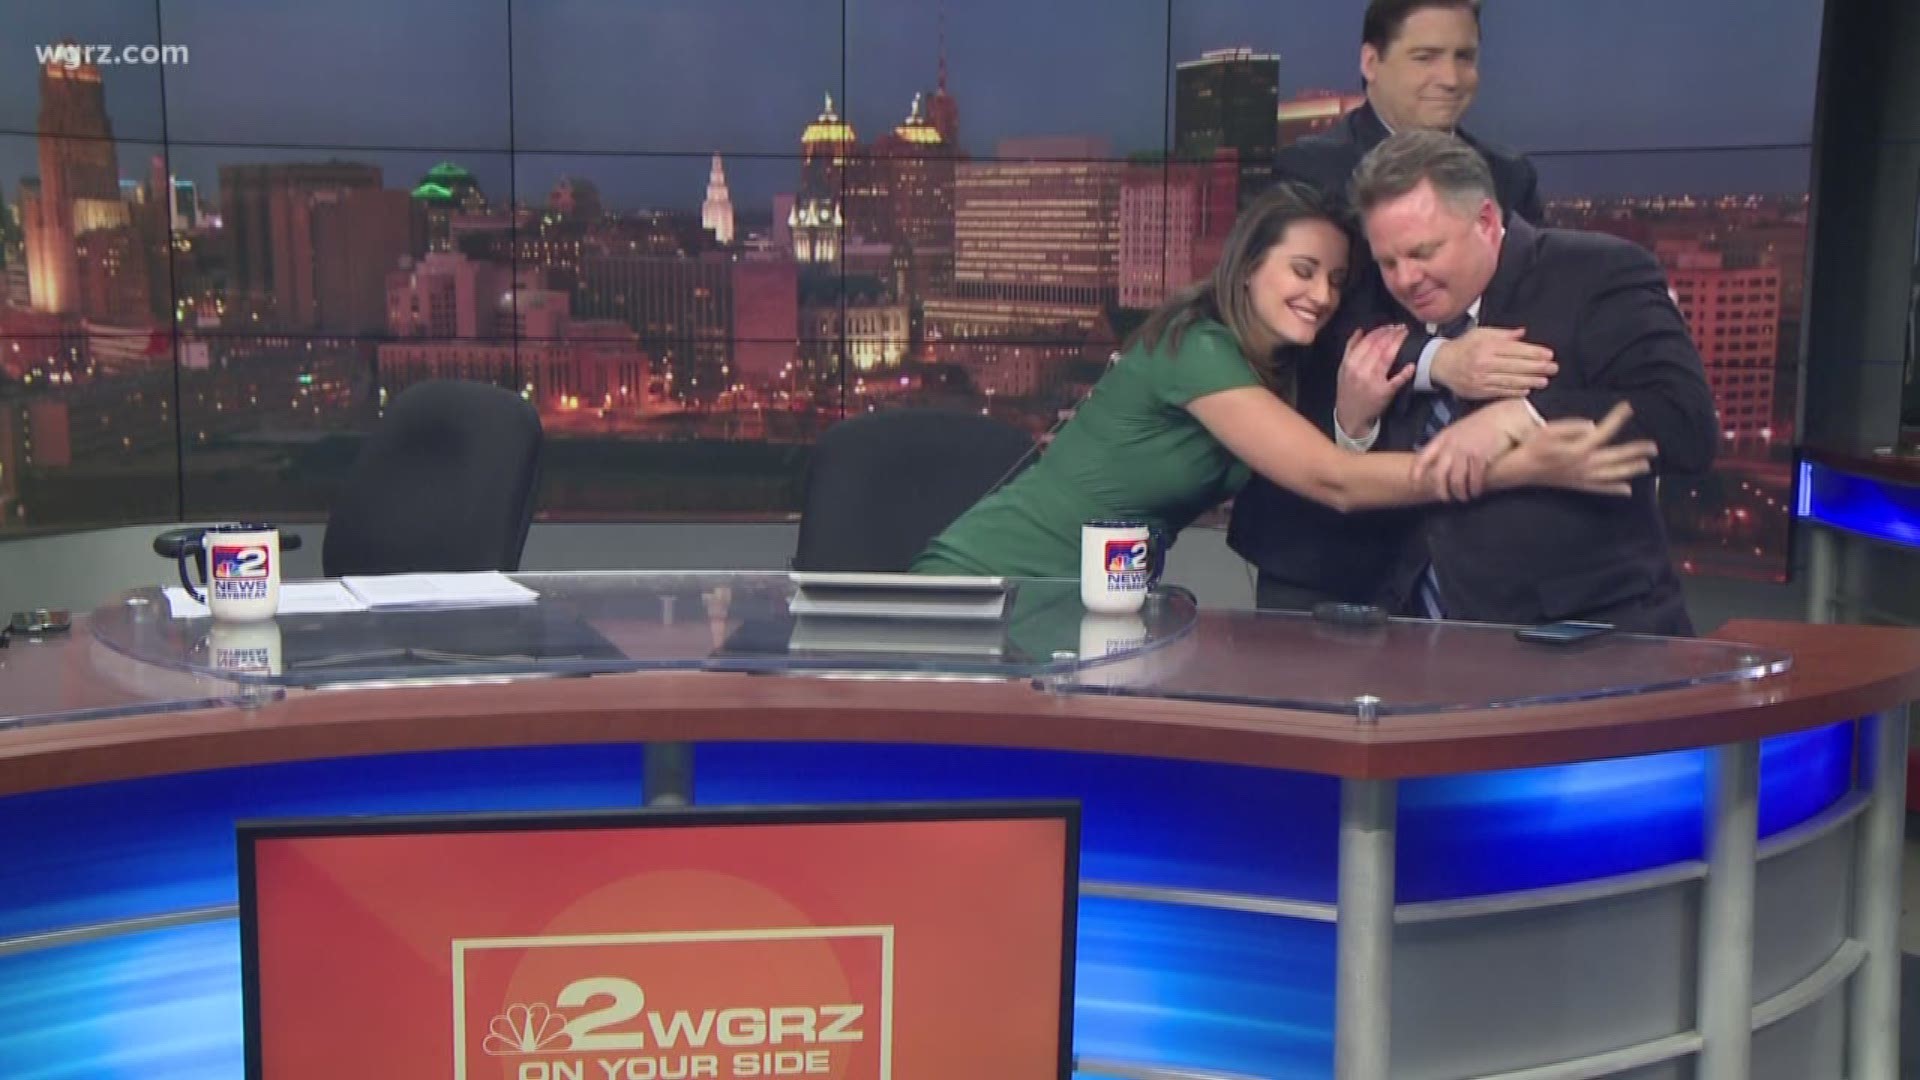 Patrick reads mean tweets viewers have sent in. Pete and Melissa console him with a big hug.